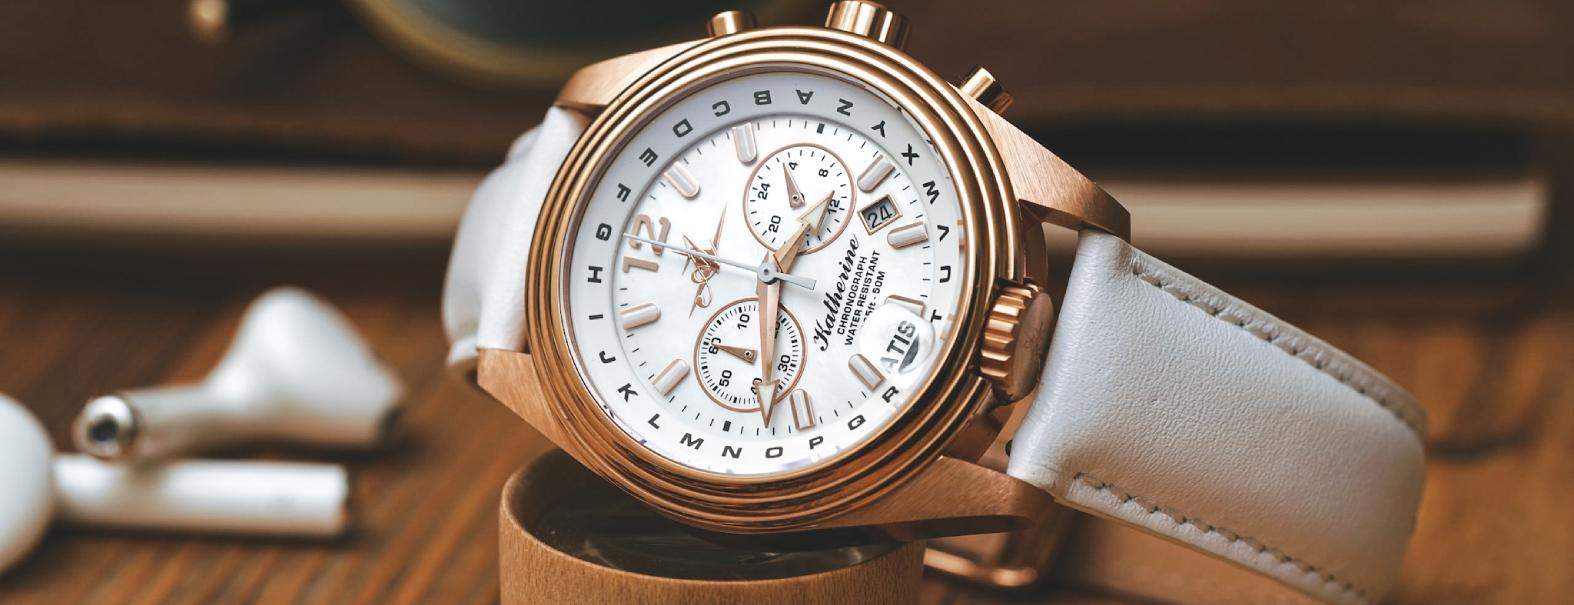 Abingdon Co. A image displaying  Katherine First Class with 24k rose gold mother of pearl analog watch with white leather strap side front view on wrist. 24k rose gold watch head that has a white leather band and a white dial tilted on its side on the left side in a display motion